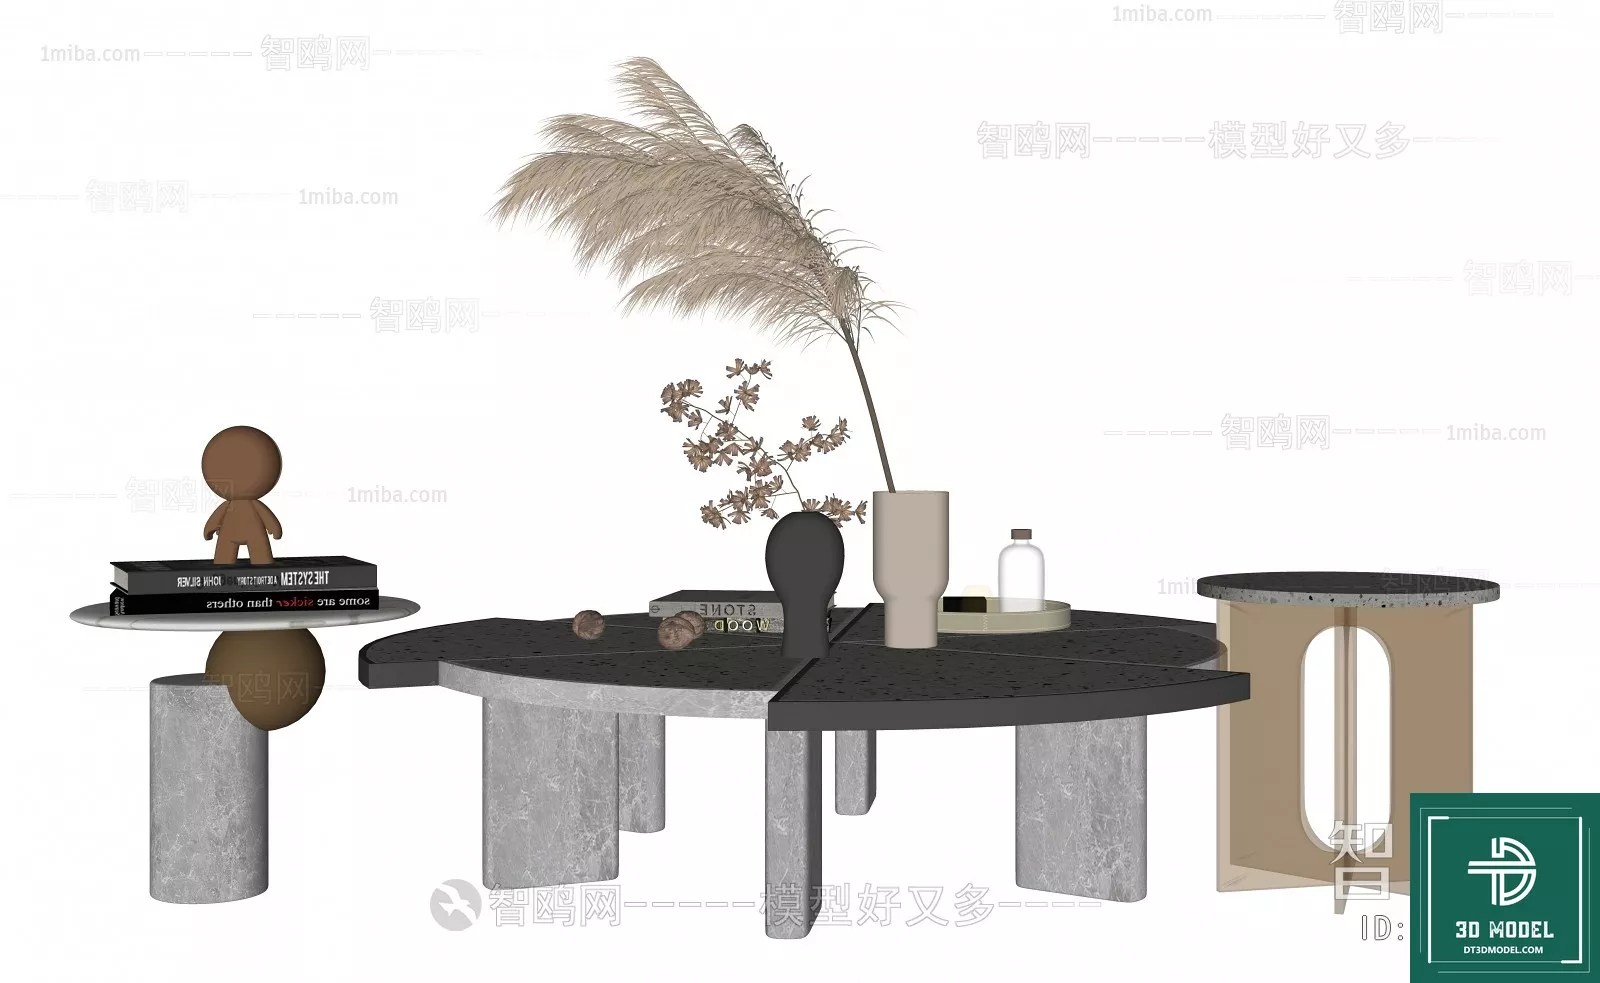 MODERN TEA TABLE - SKETCHUP 3D MODEL - VRAY OR ENSCAPE - ID14975